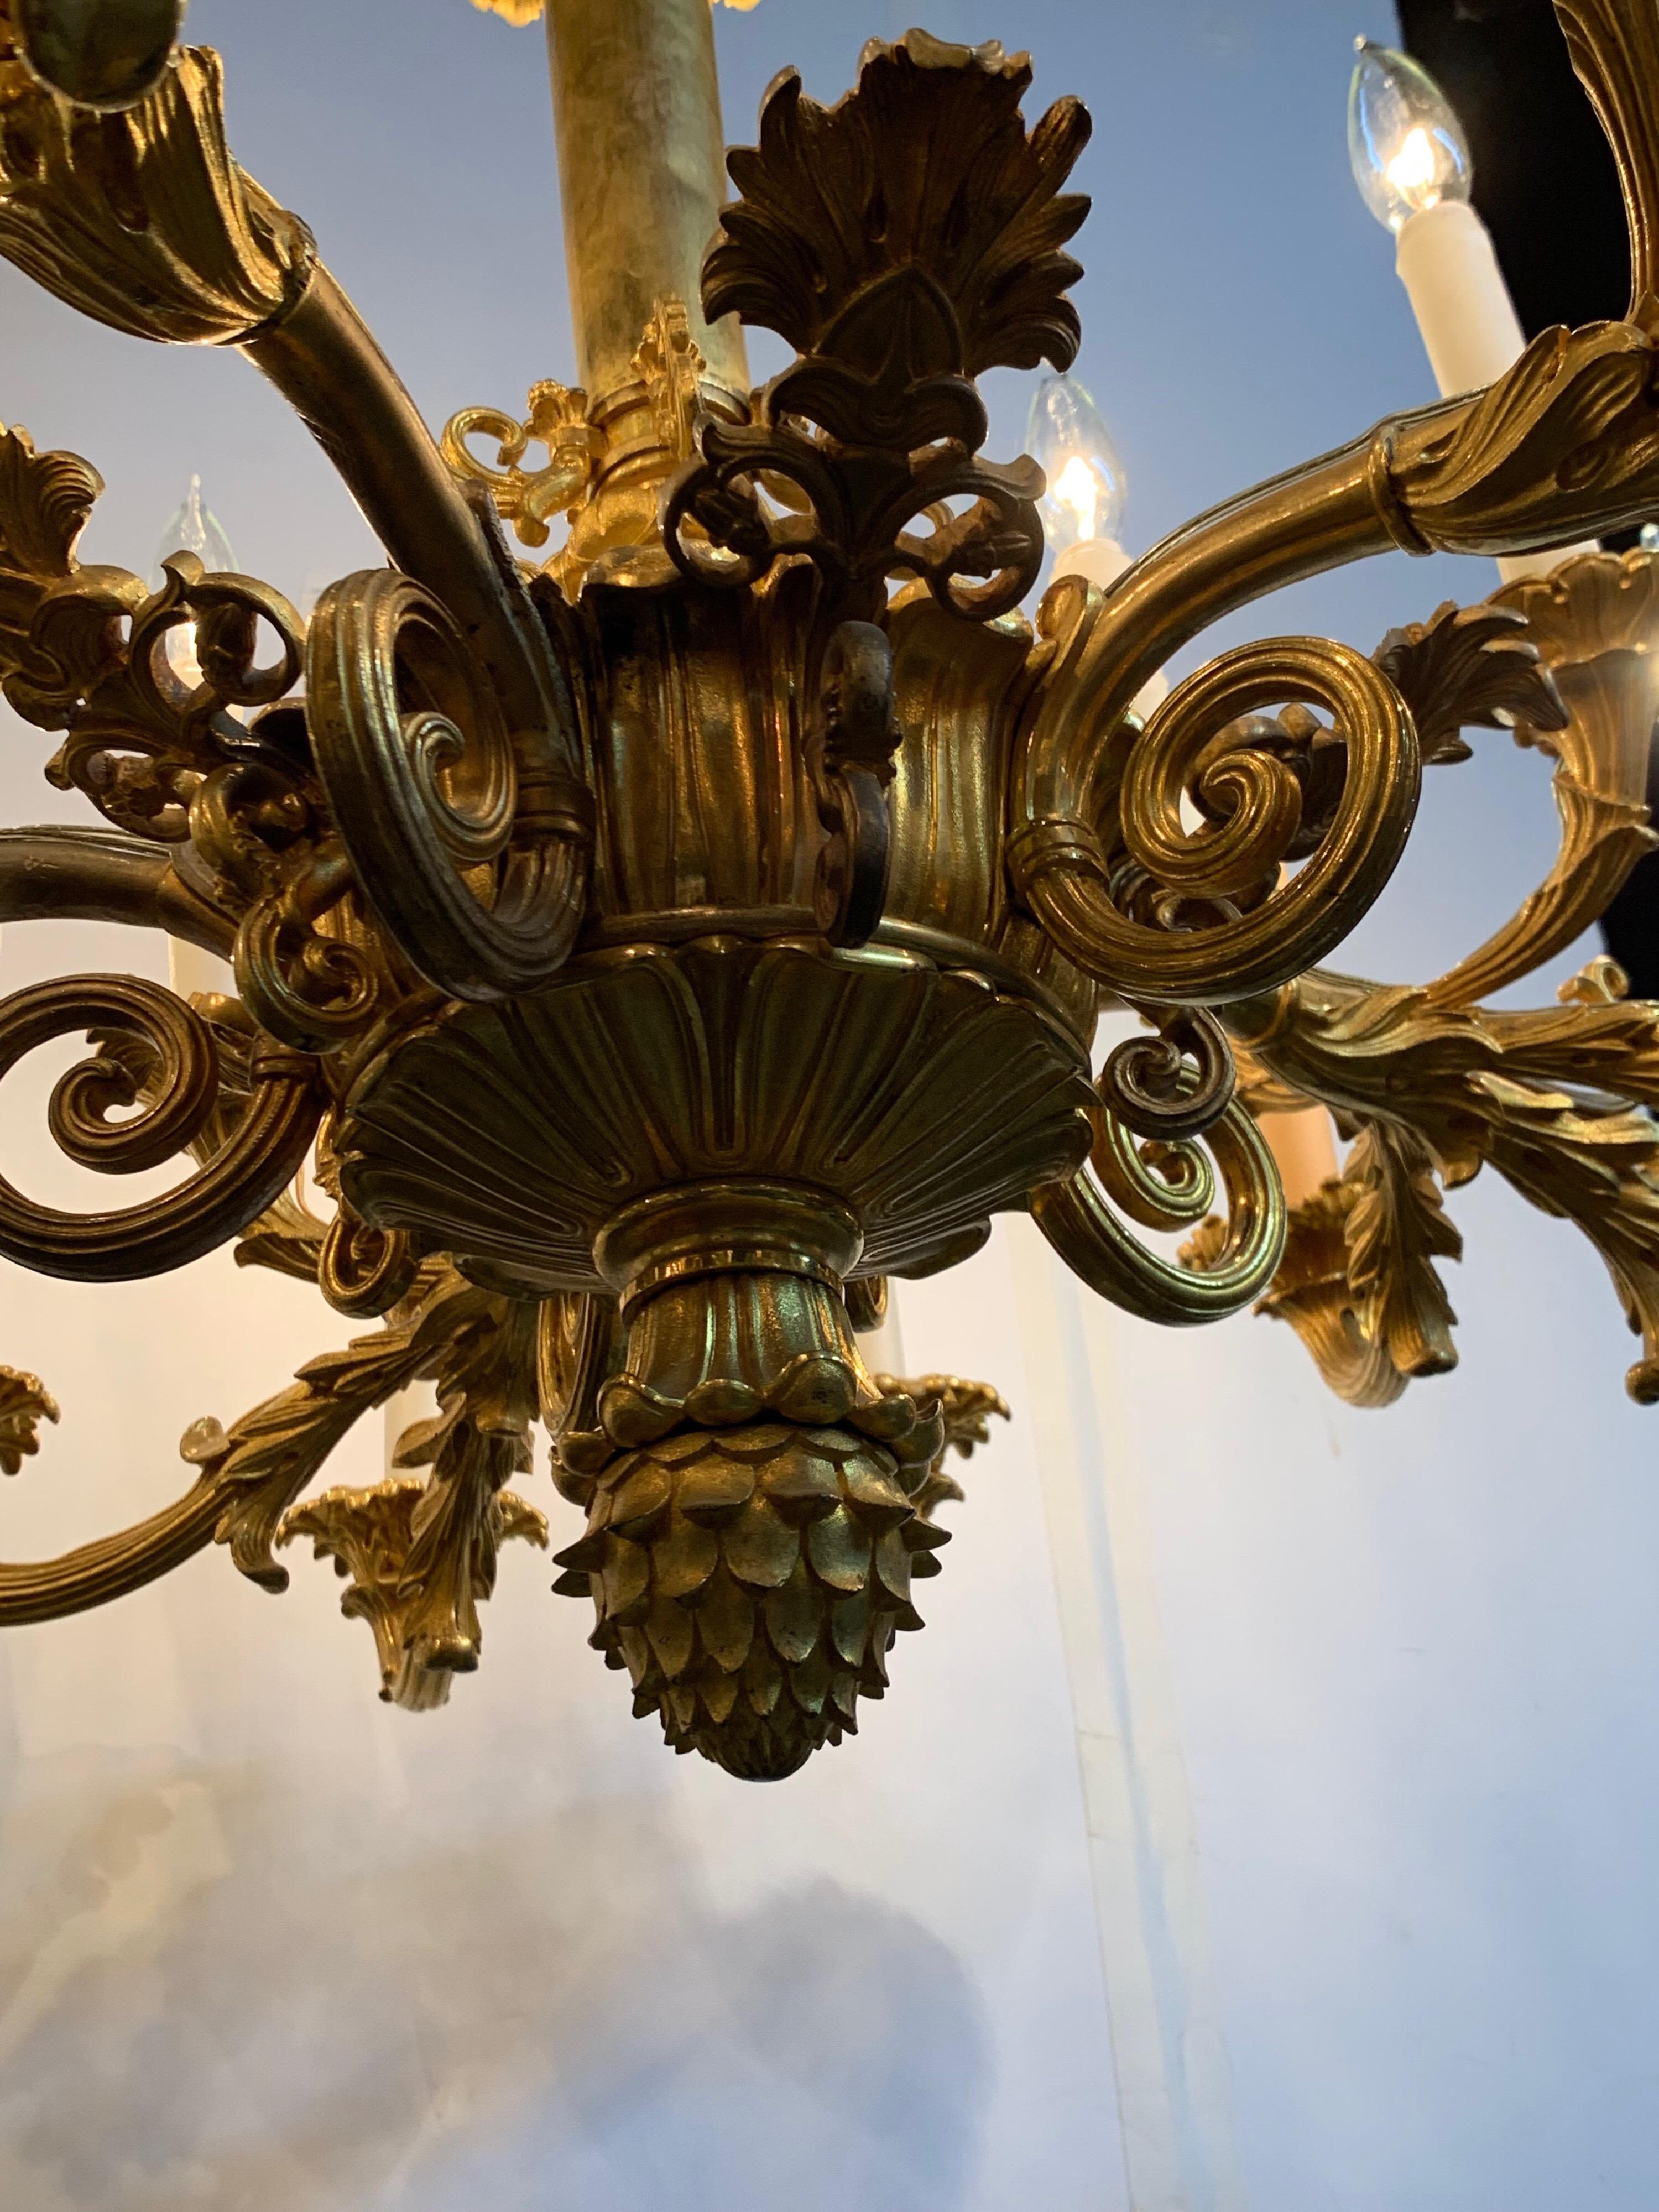 Beautiful 24 light 19th century French Louis XVI style bronze chandelier. Very fine detail and quality on this fixture. Stunning!